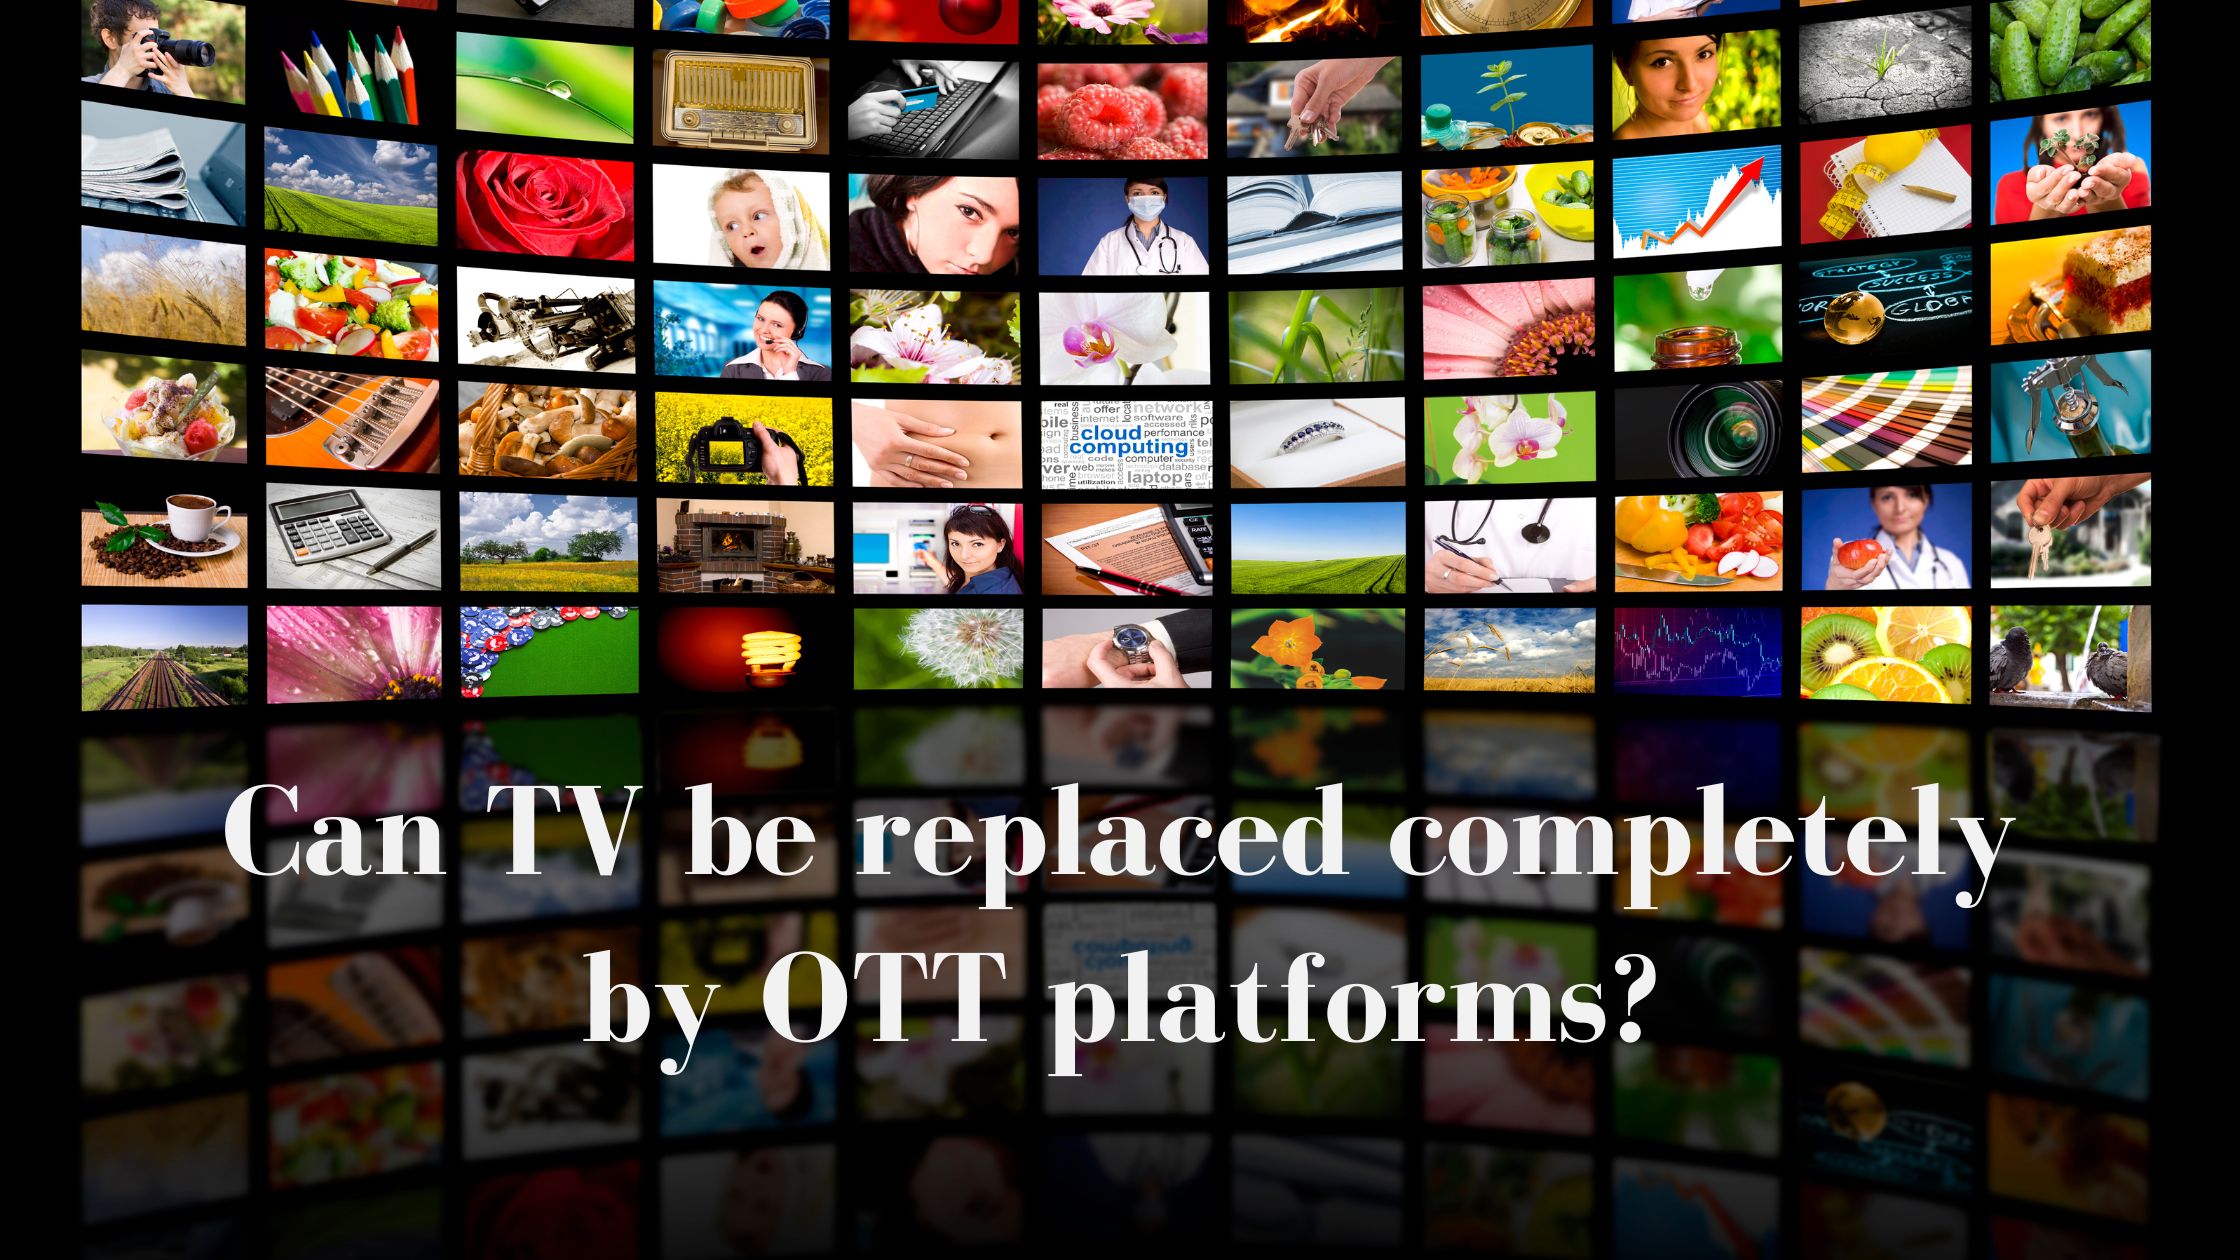 Can TV be replaced completely by OTT platforms?